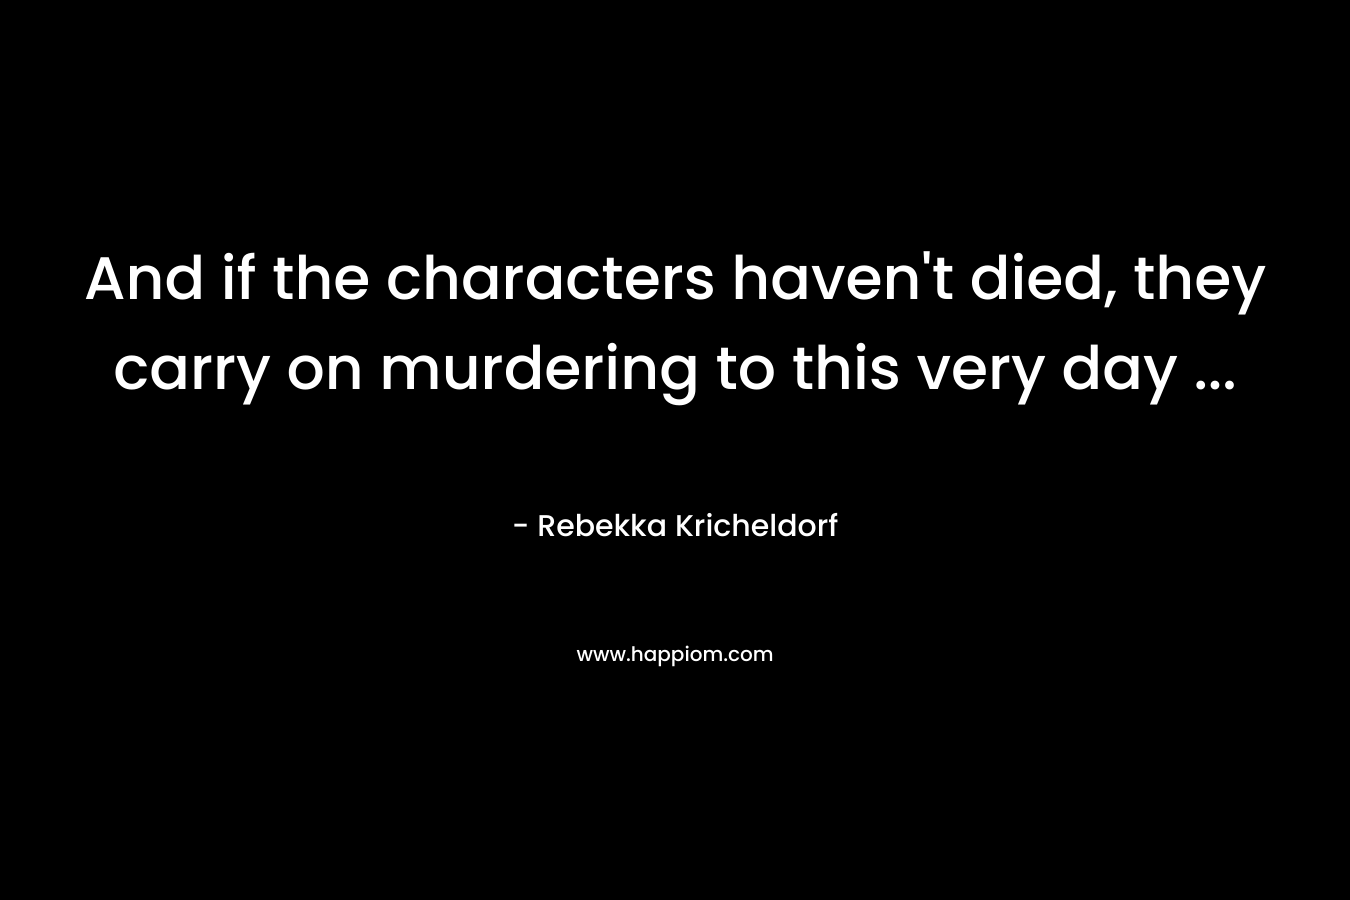 And if the characters haven’t died, they carry on murdering to this very day … – Rebekka Kricheldorf